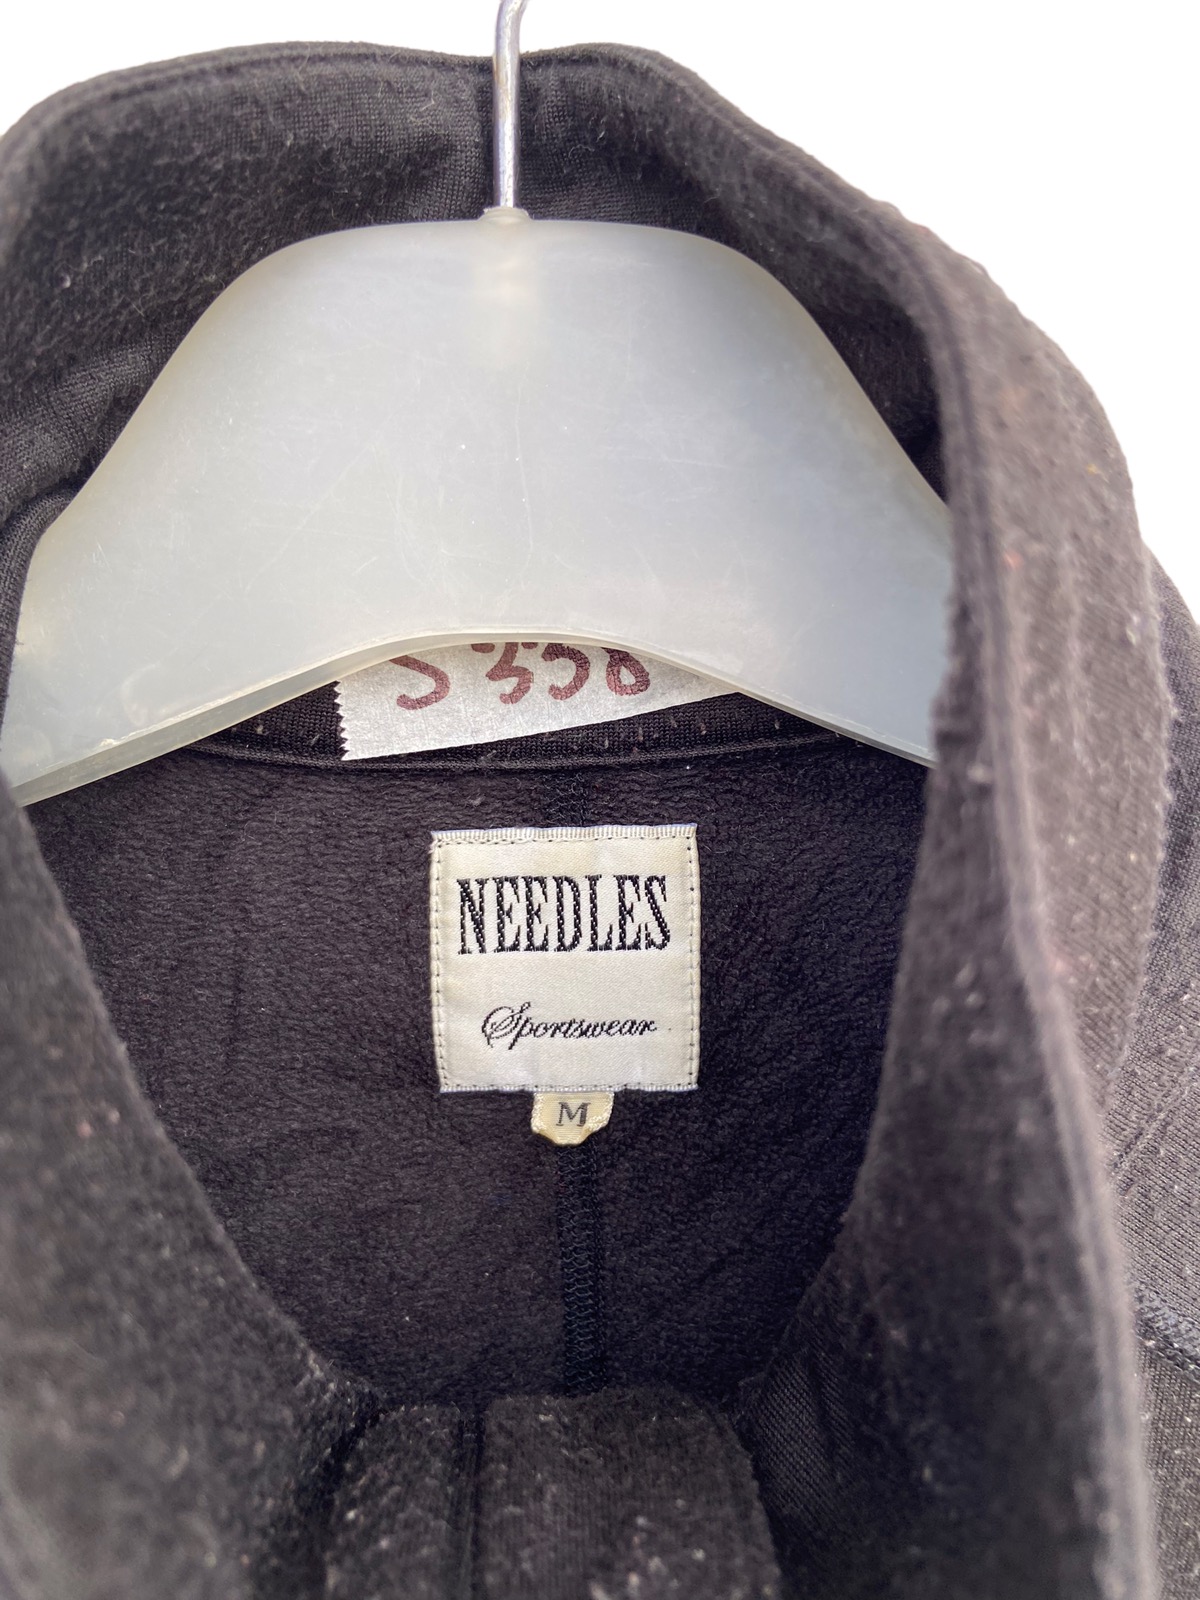 Needles Sportwear Nepenthes Tracktop - 5